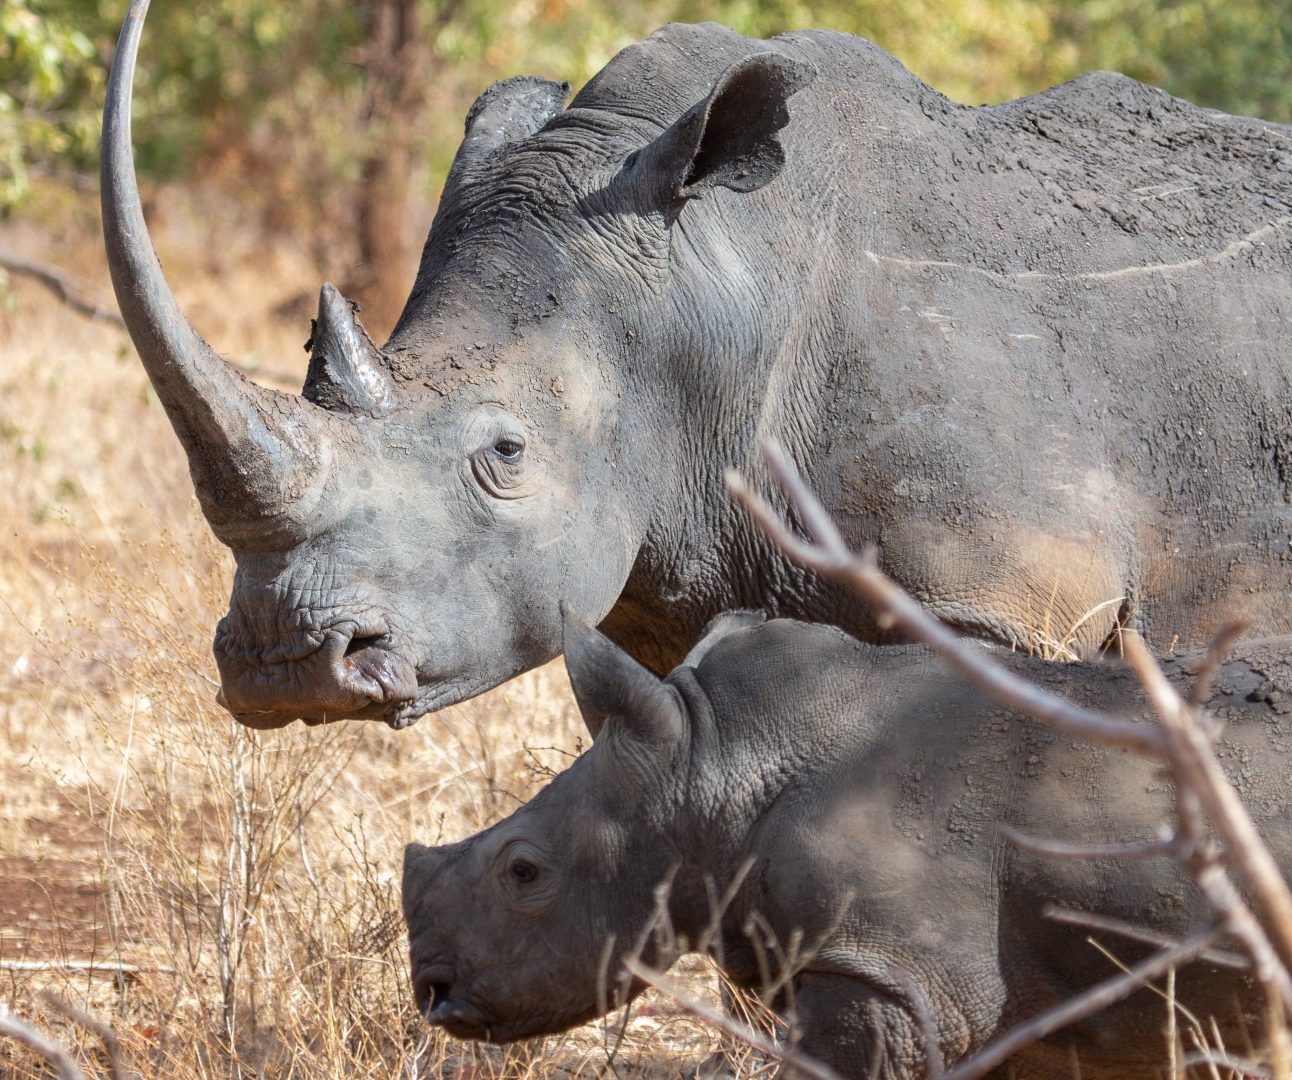 A rhino mother and her calf, in the wild